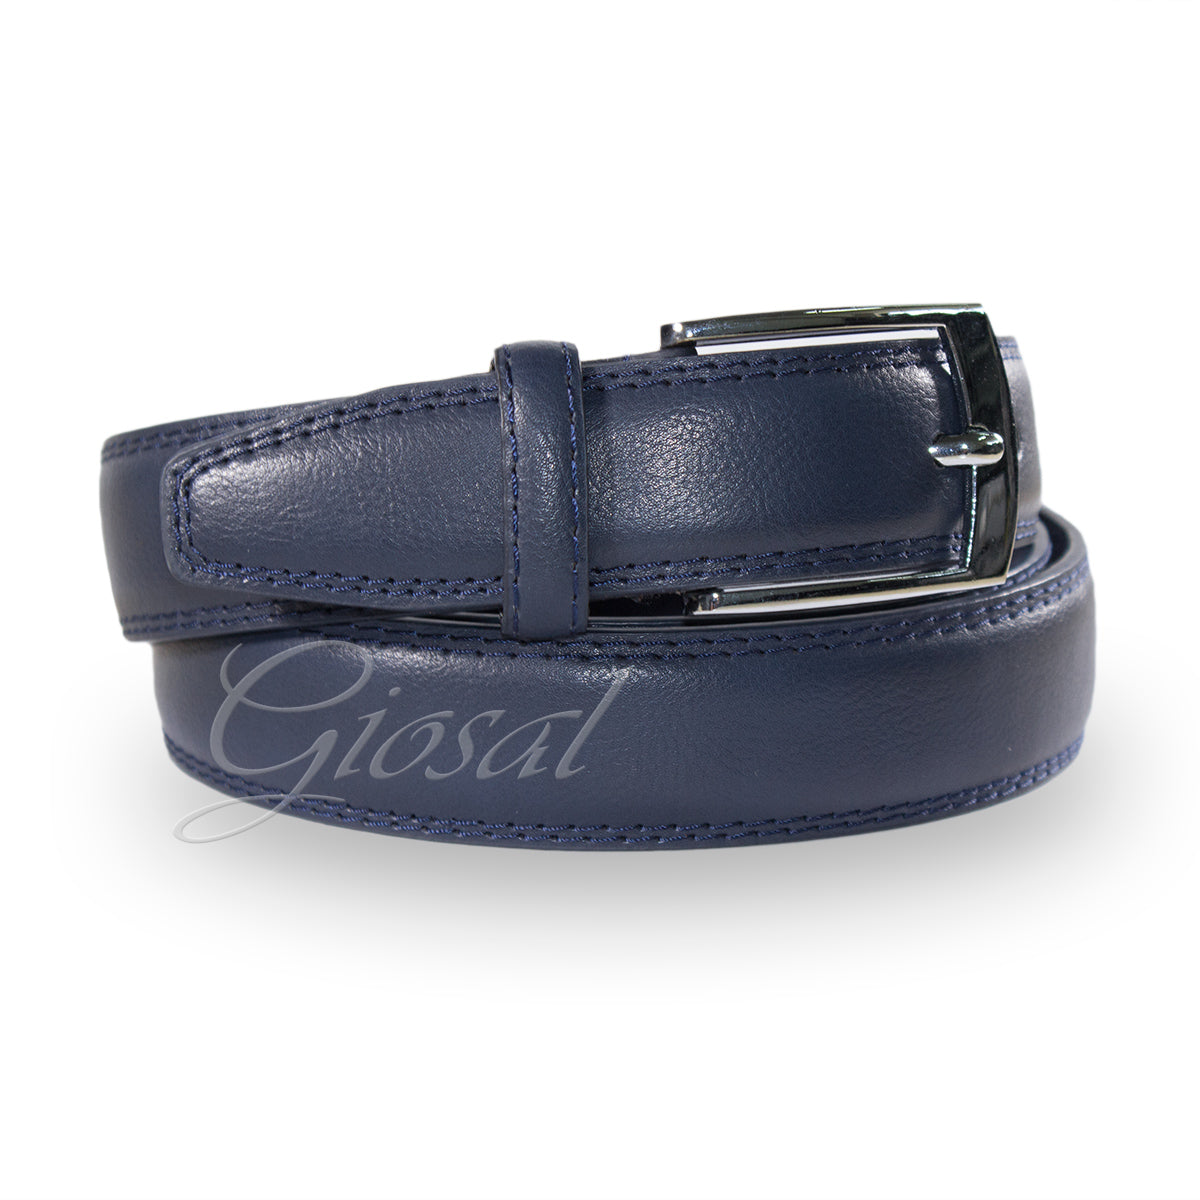 Men's Belt Belt with Adjustable Metal Buckle Blue Faux Leather Solid Color Basic GIOSAL-A2041A